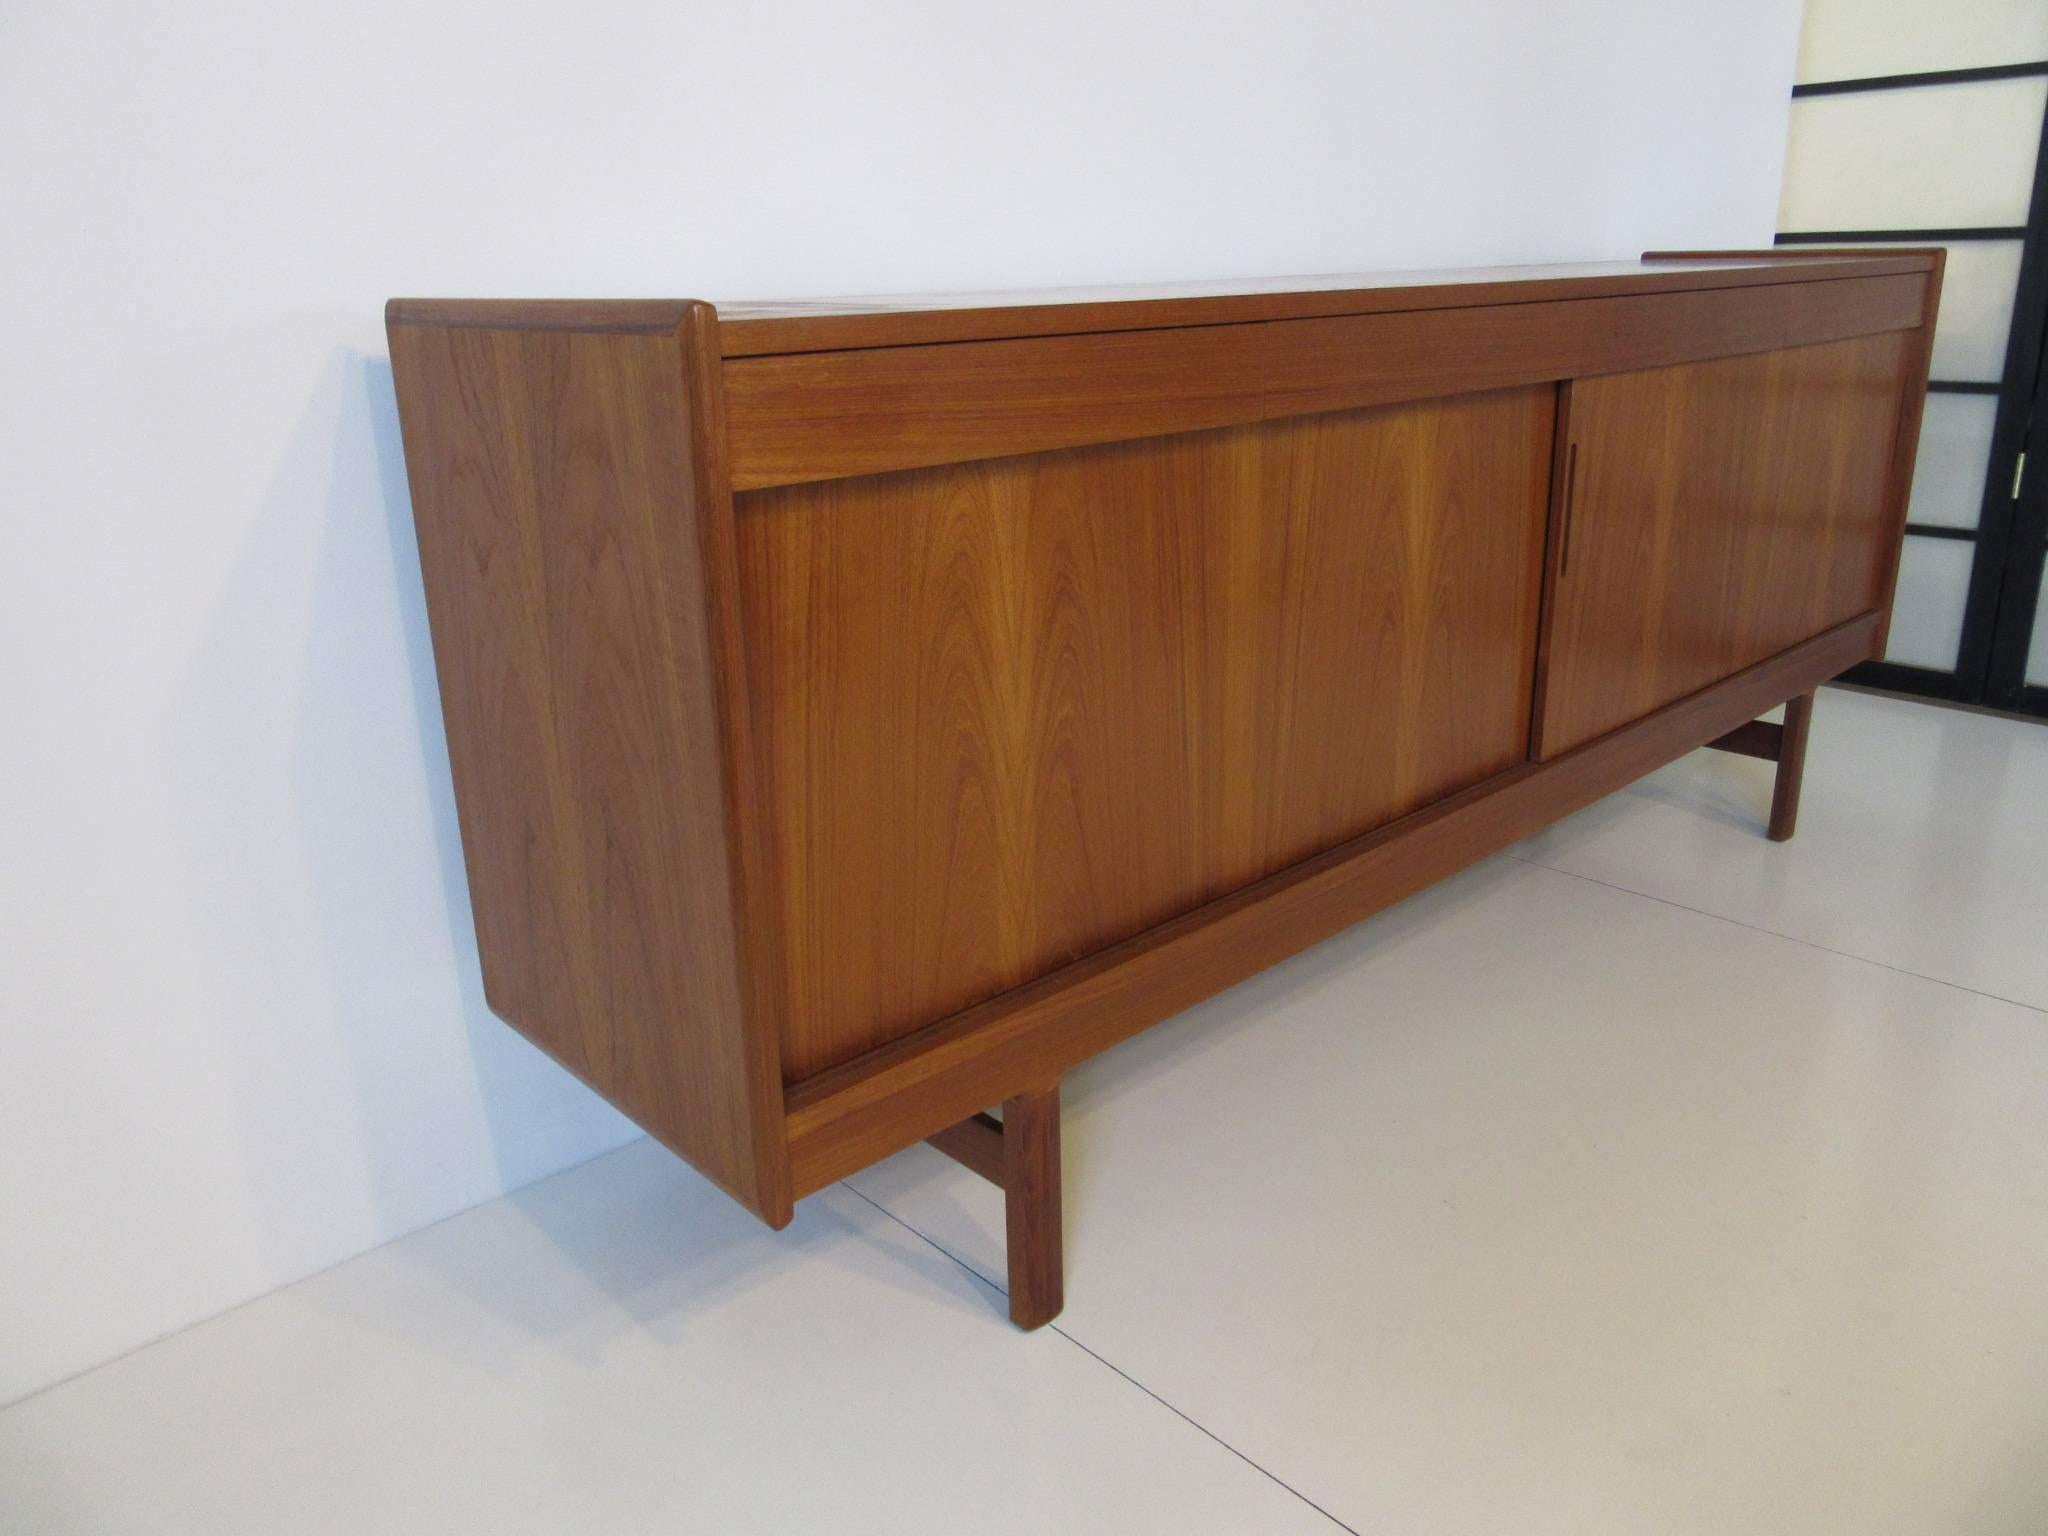 A well crafted teakwood sever or credenza with four upper drawers for storage and two lower sliding door with storage and adjustable shelves. On one side are four smaller pull out drawers all done in a lighter wood , the back of the piece is also